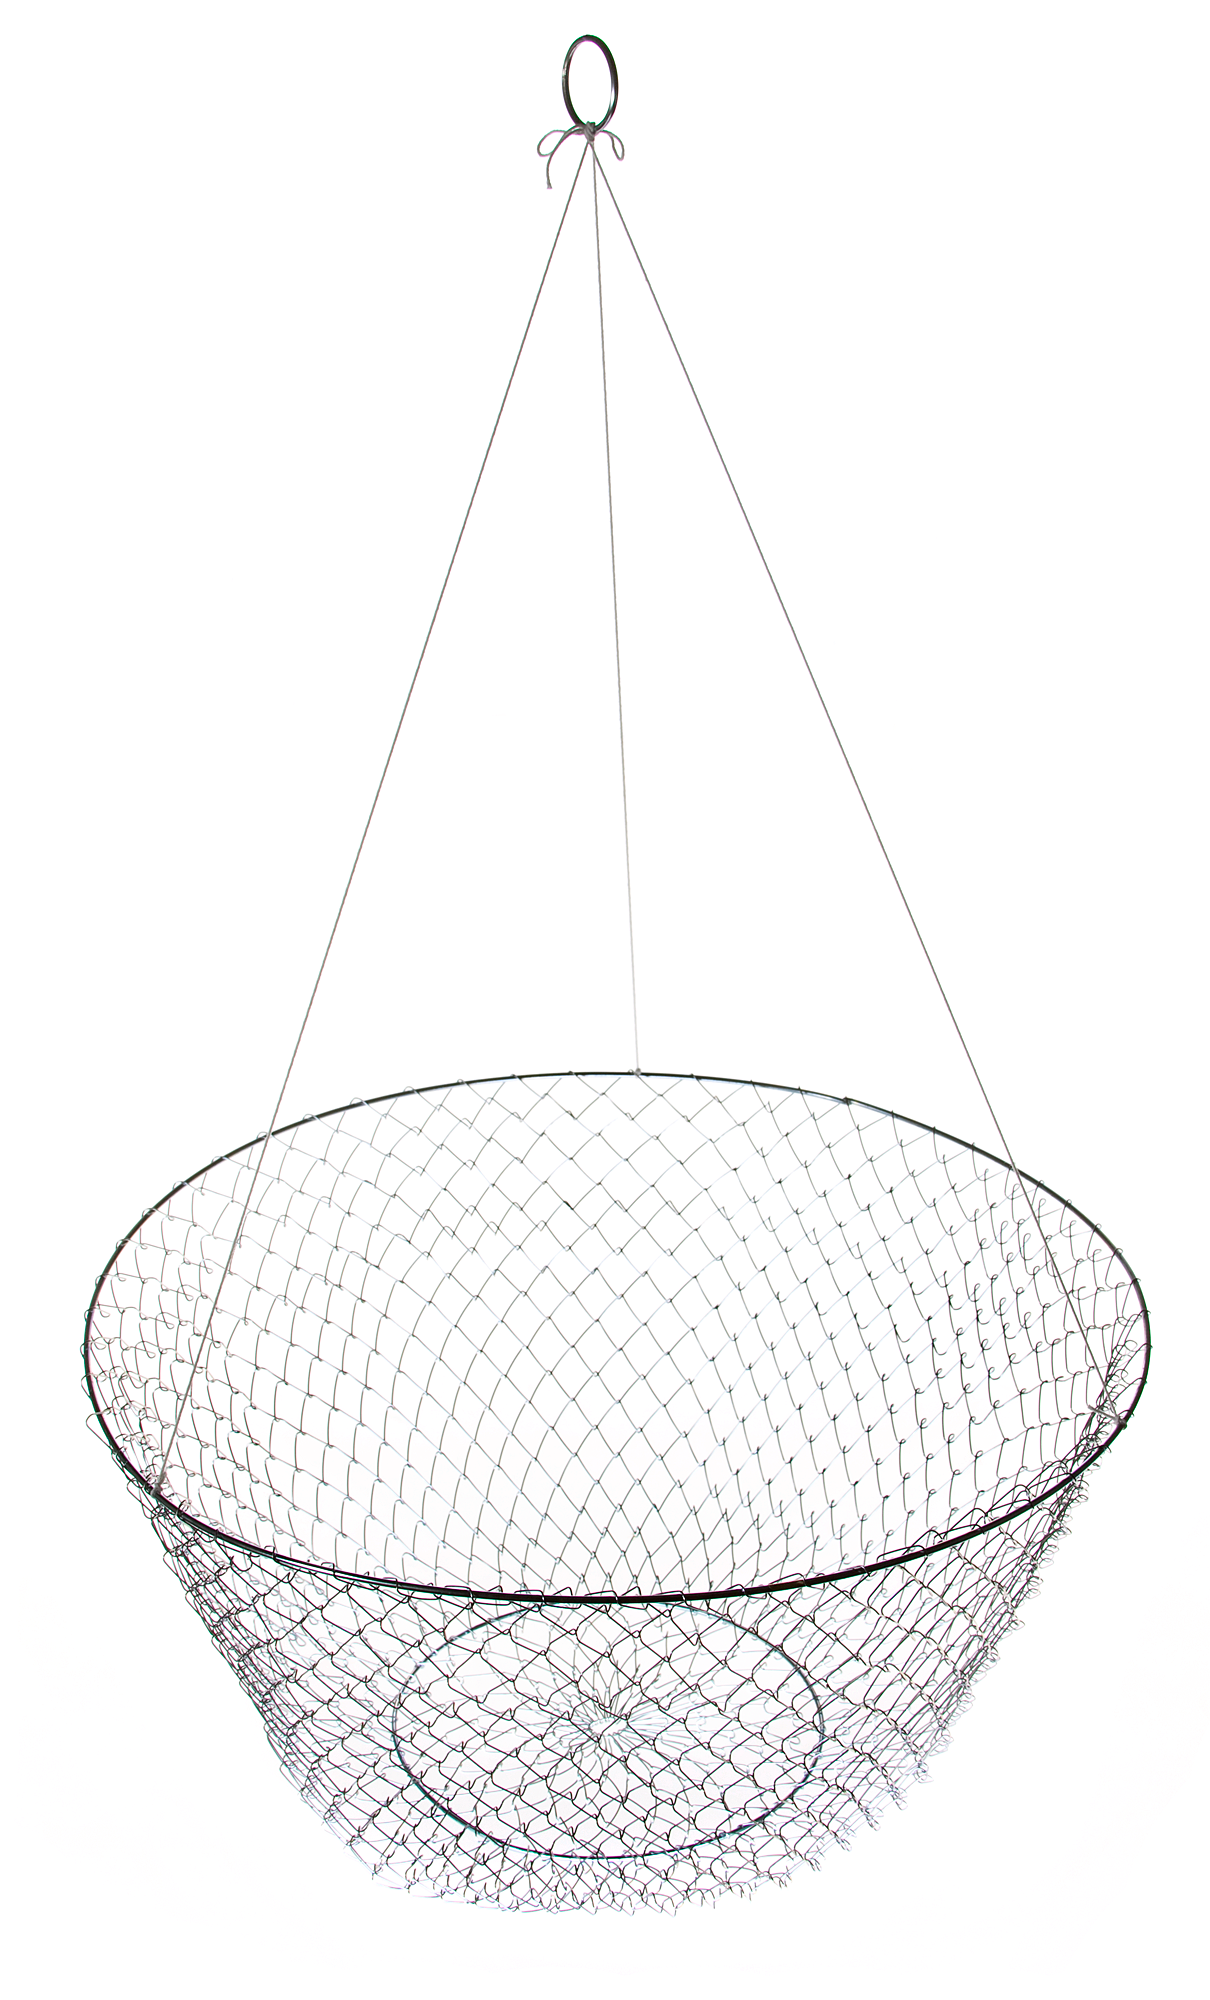  Automatic Opening & Closing Fishing Net Cage,Wire Crab Net  Fishing Hairy Crab Tool ([Diameter 52cm] 16 Steel Wire) : Sports & Outdoors